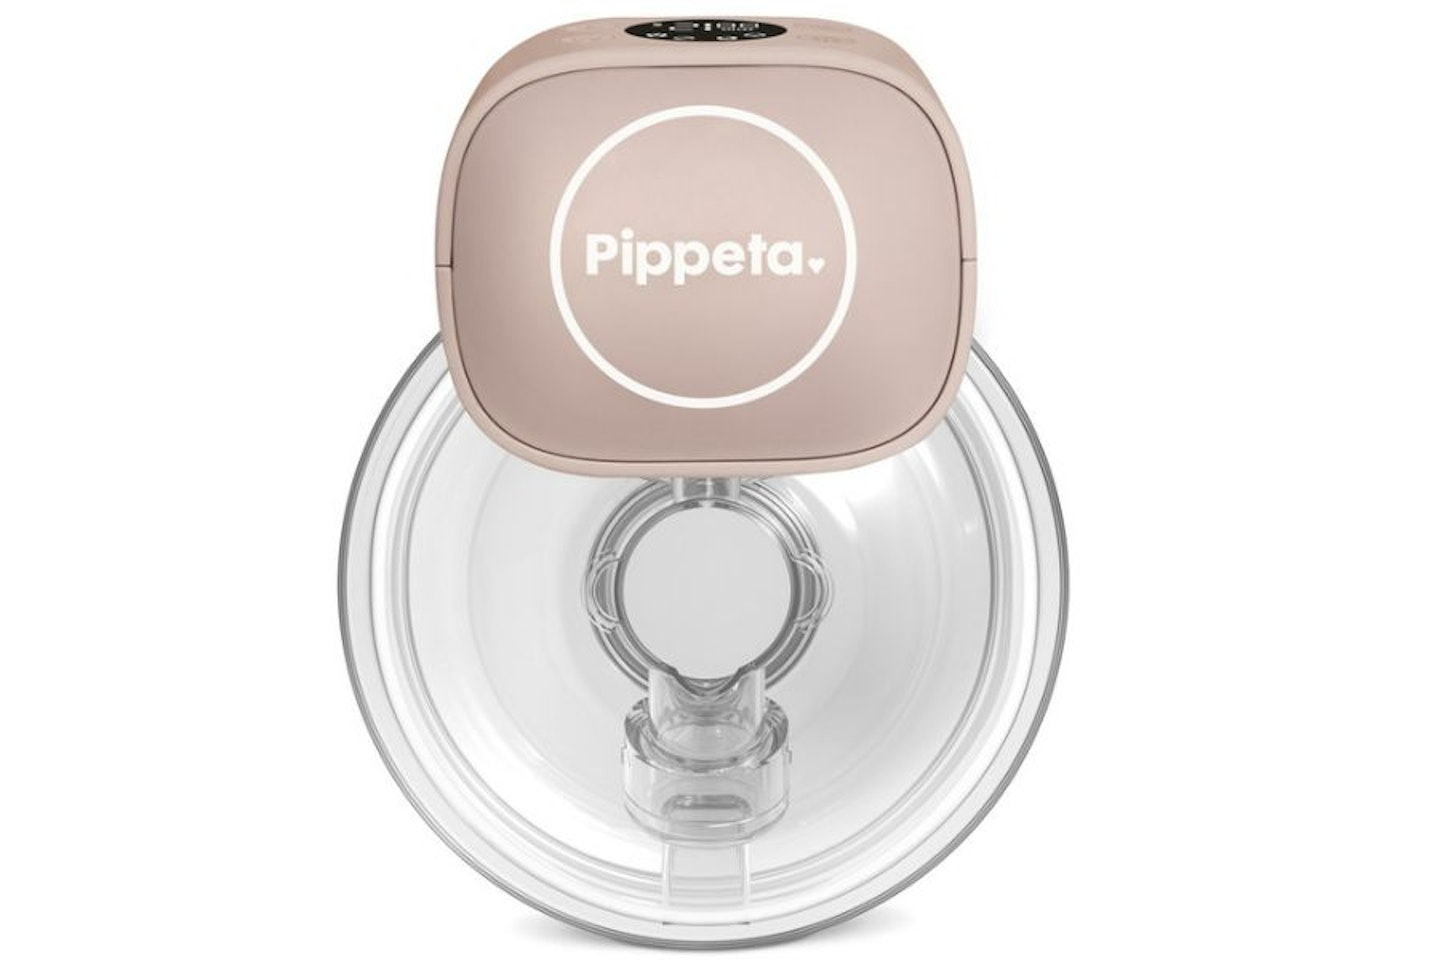 Pippeta Wearable Hands Free Breast Pump review